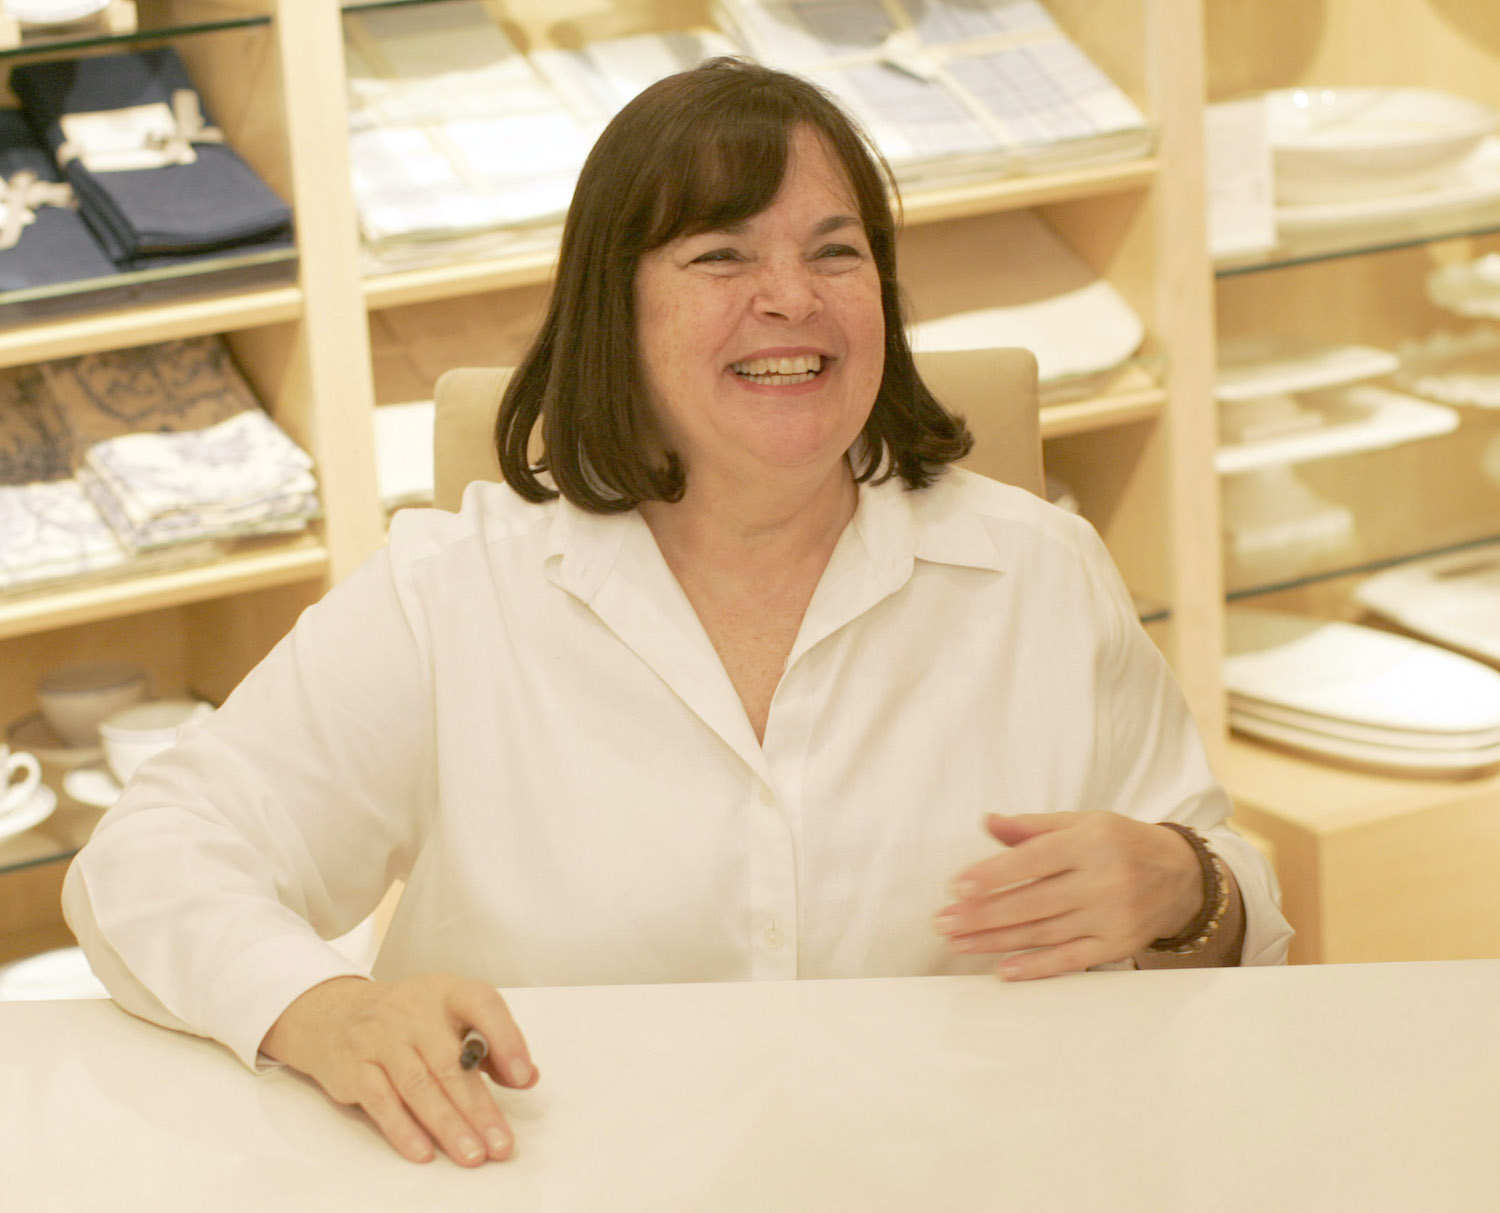 Ina Garten attends The Barefoot Contessa book signing at William Sonoma in 2018